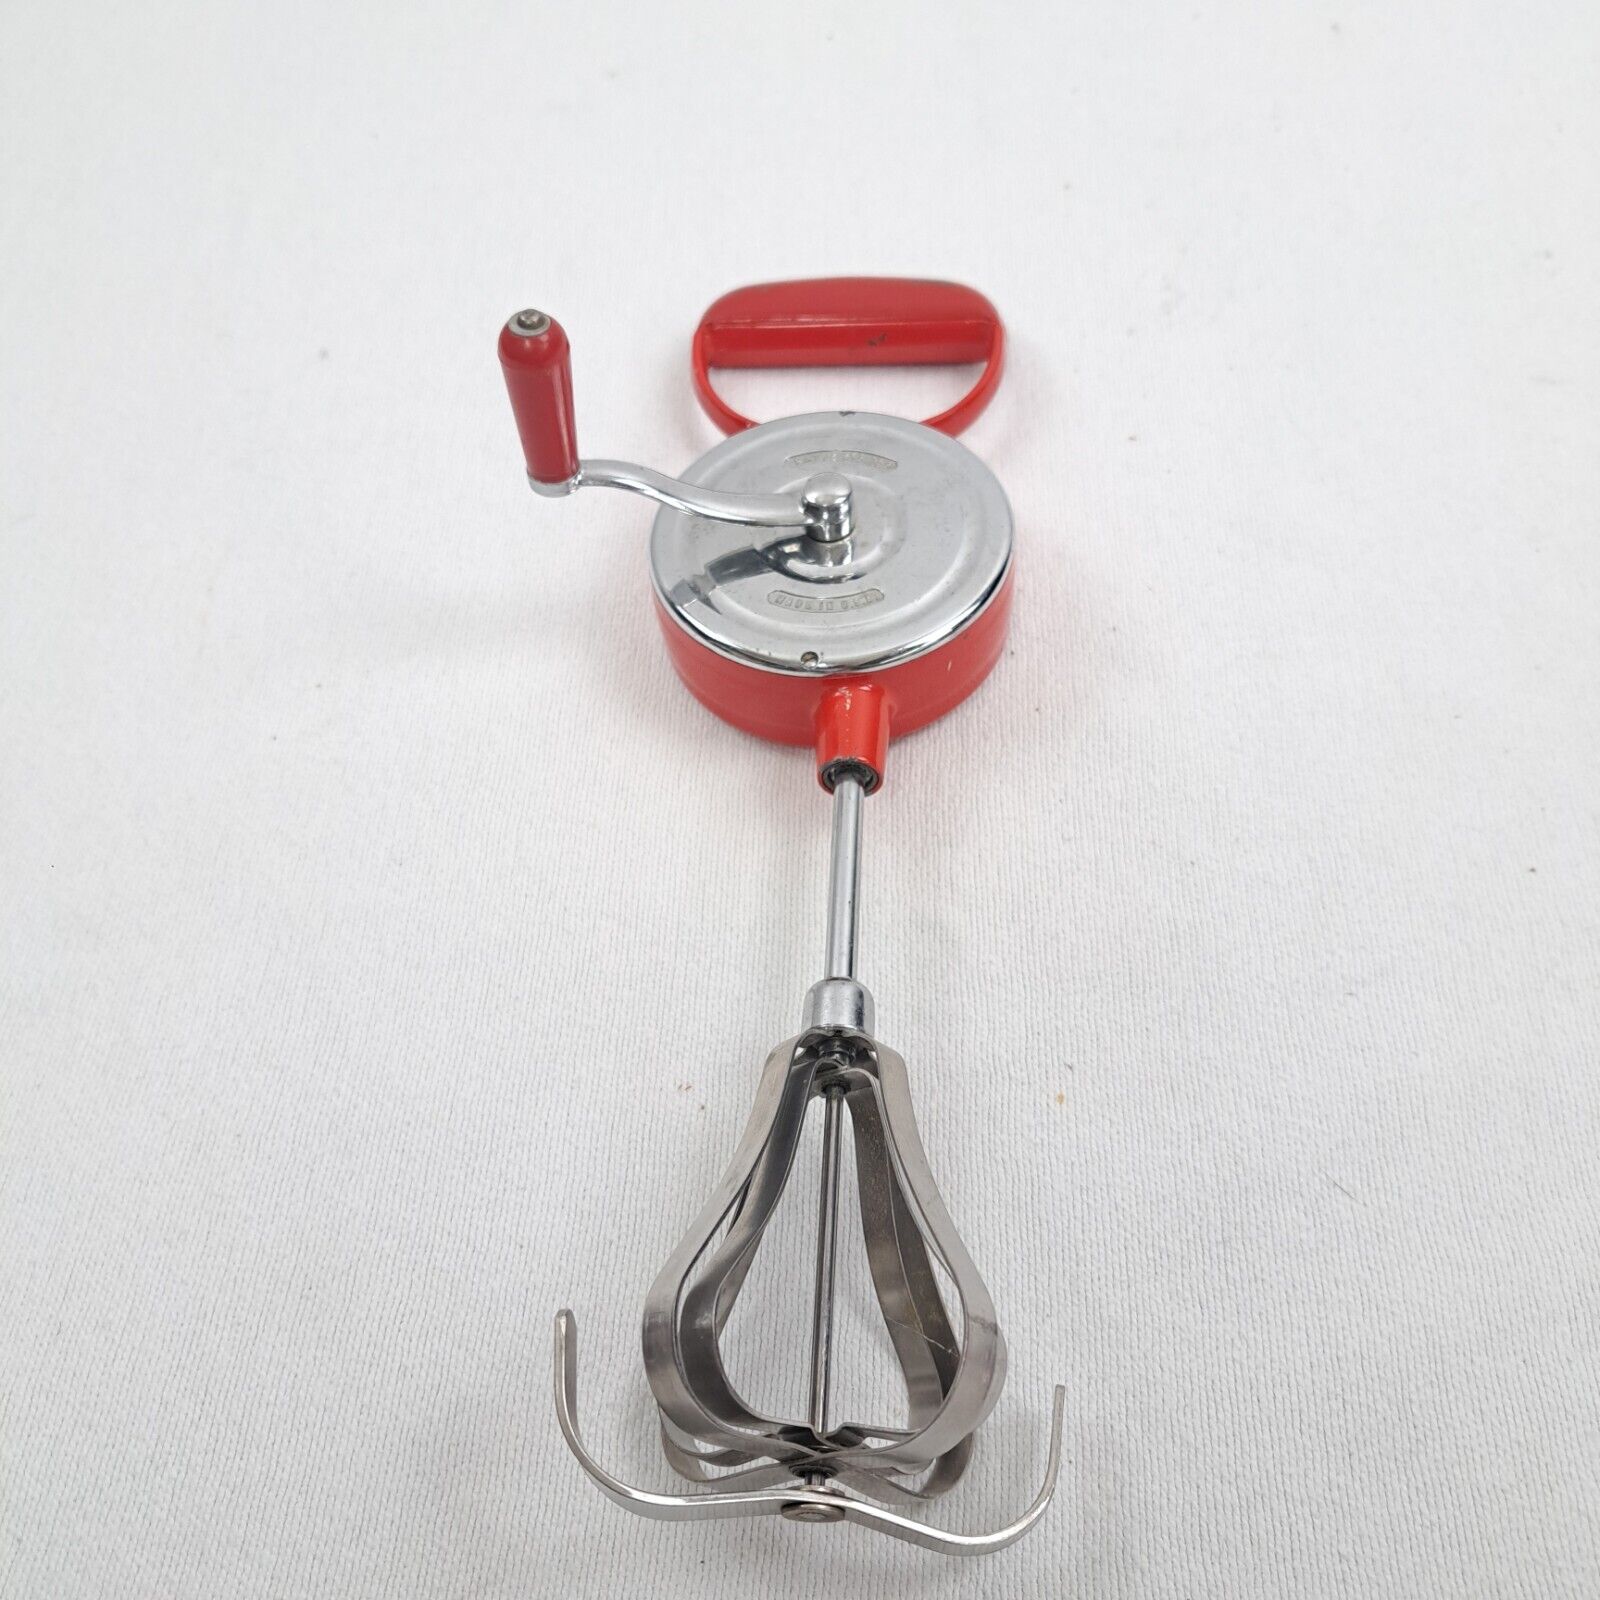 RIVAL SPEED MIXER Vintage Handheld/Manual Mixer w/Egg Beater MADE IN USA